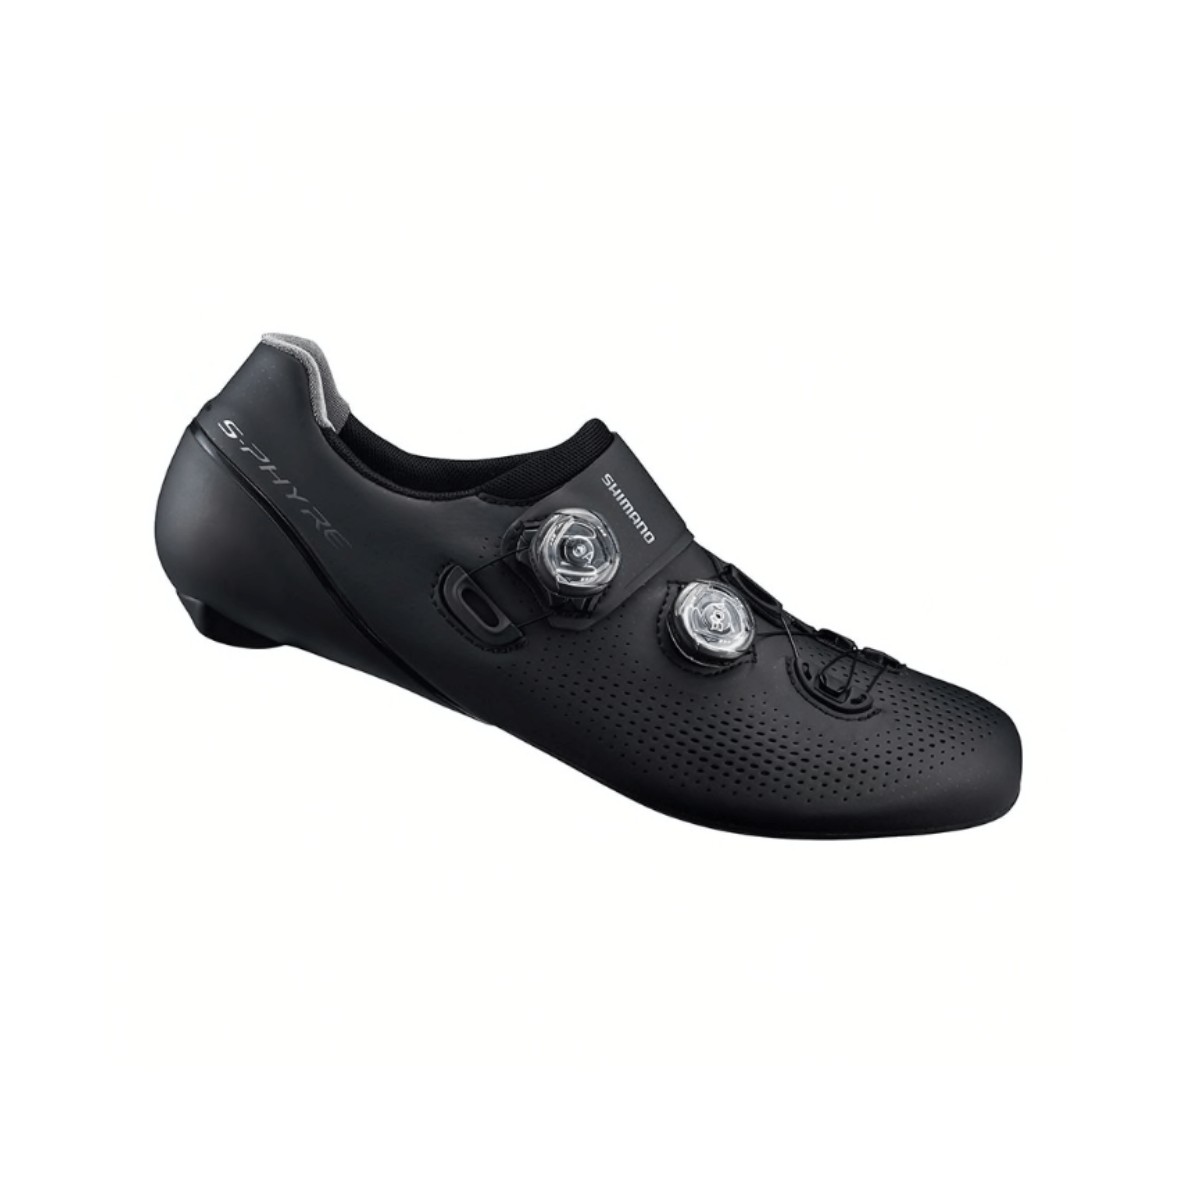 Shimano RC9 S-PHYRE Road Shoes Black, Size 40 - EUR